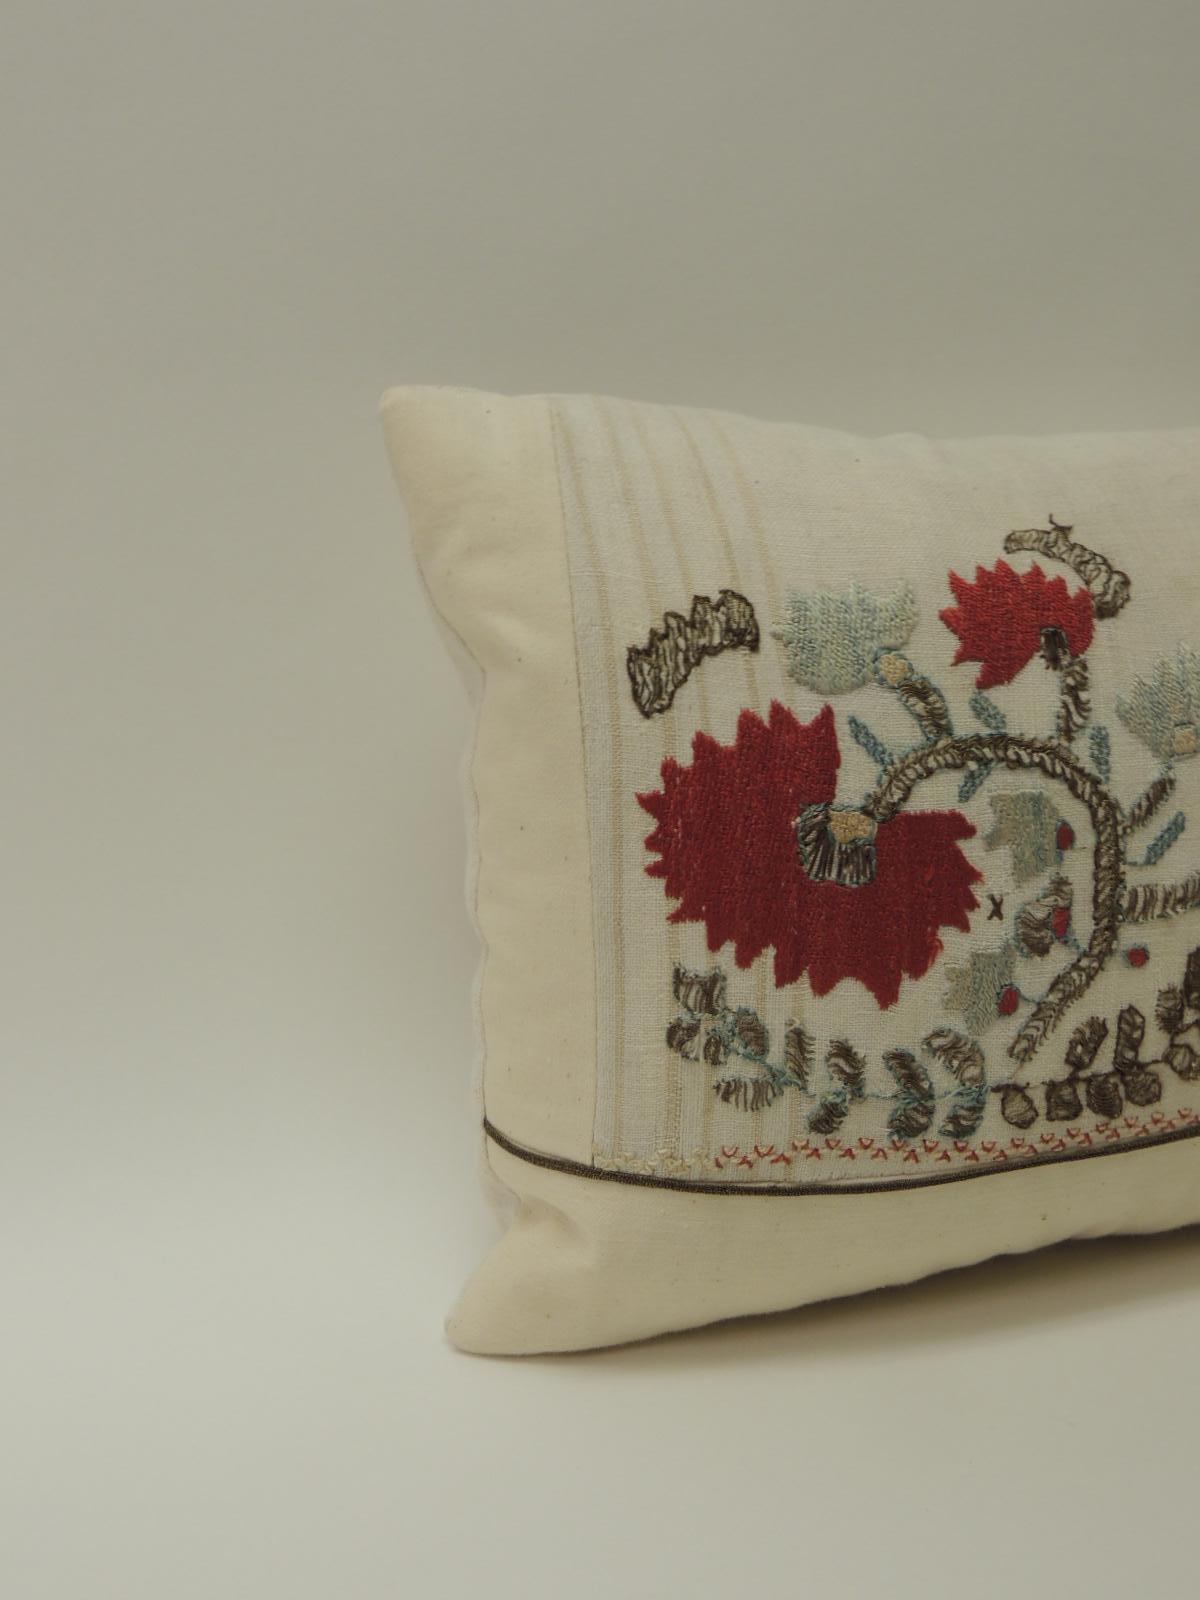 19th century Turkish embroidery lumbar pillow.
Turkish linen and silk embroidery lumbar pillow. Depicting flowers and trees, decorative gold trim across the linen frame. Natural antique linen backing. In shades of red, green, silver metallic